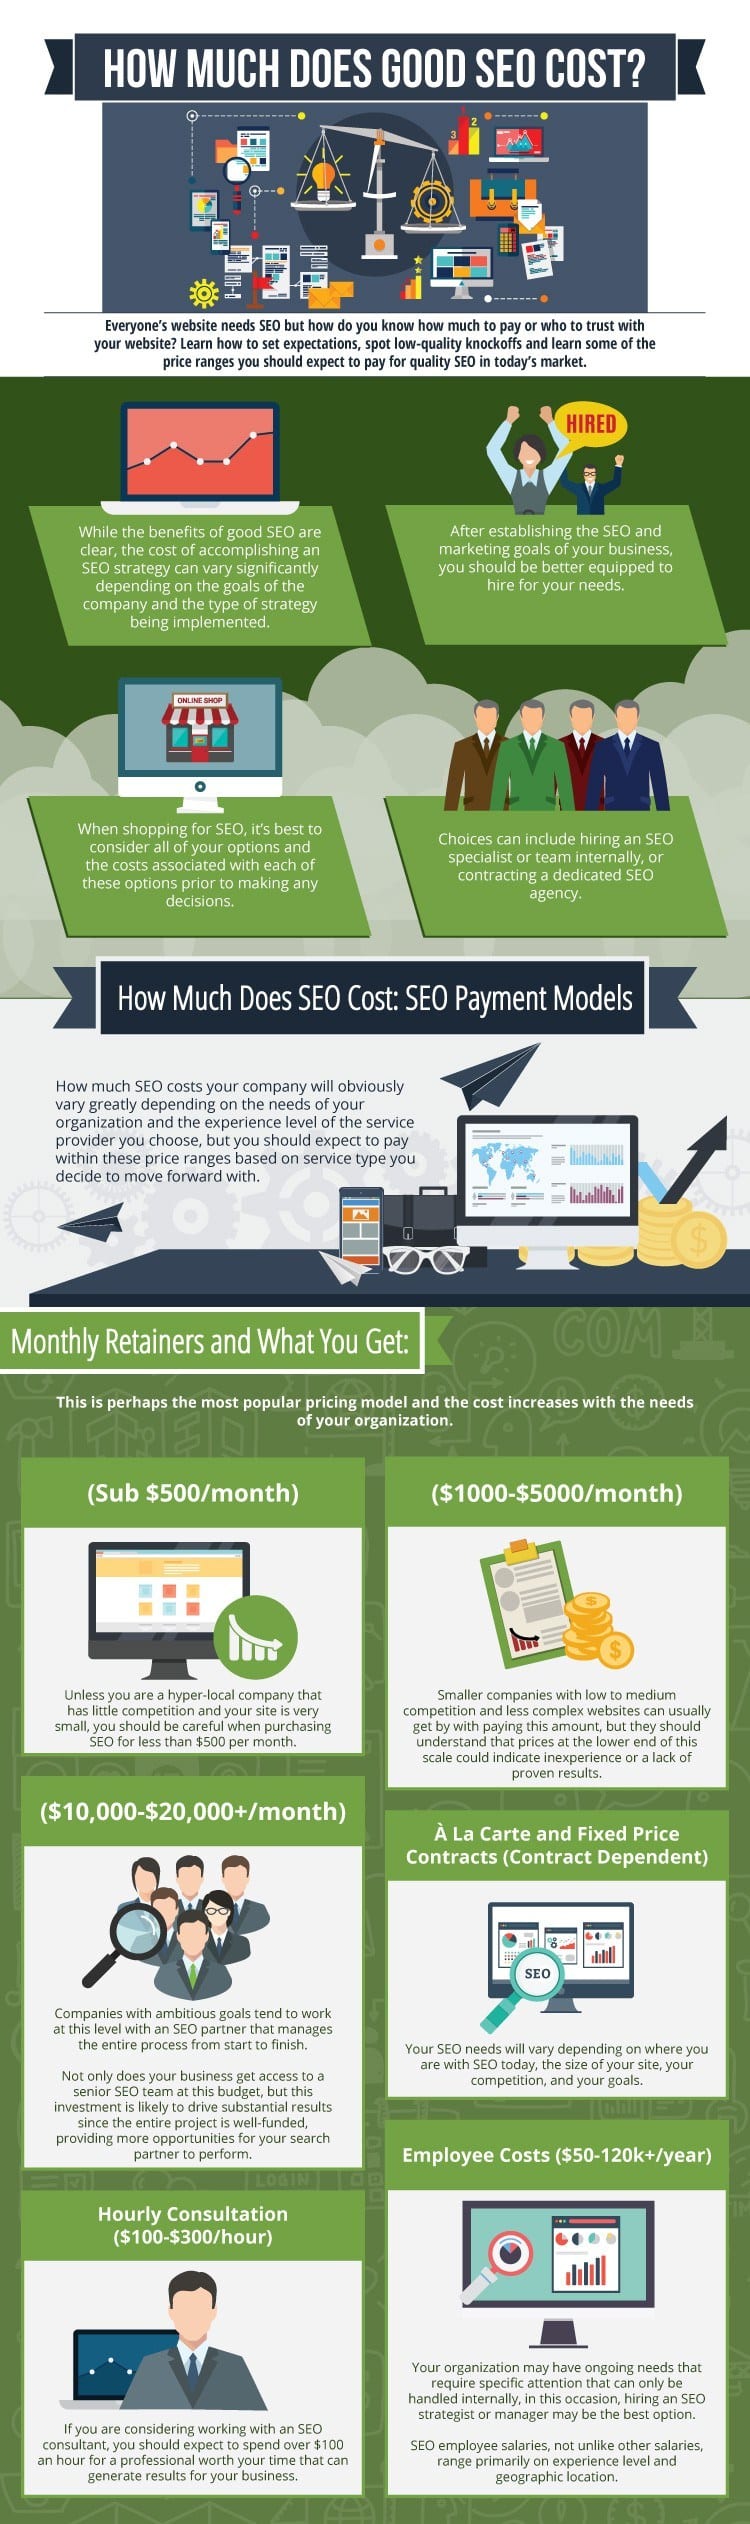 SEO Cost Infographic - Buhv Designs